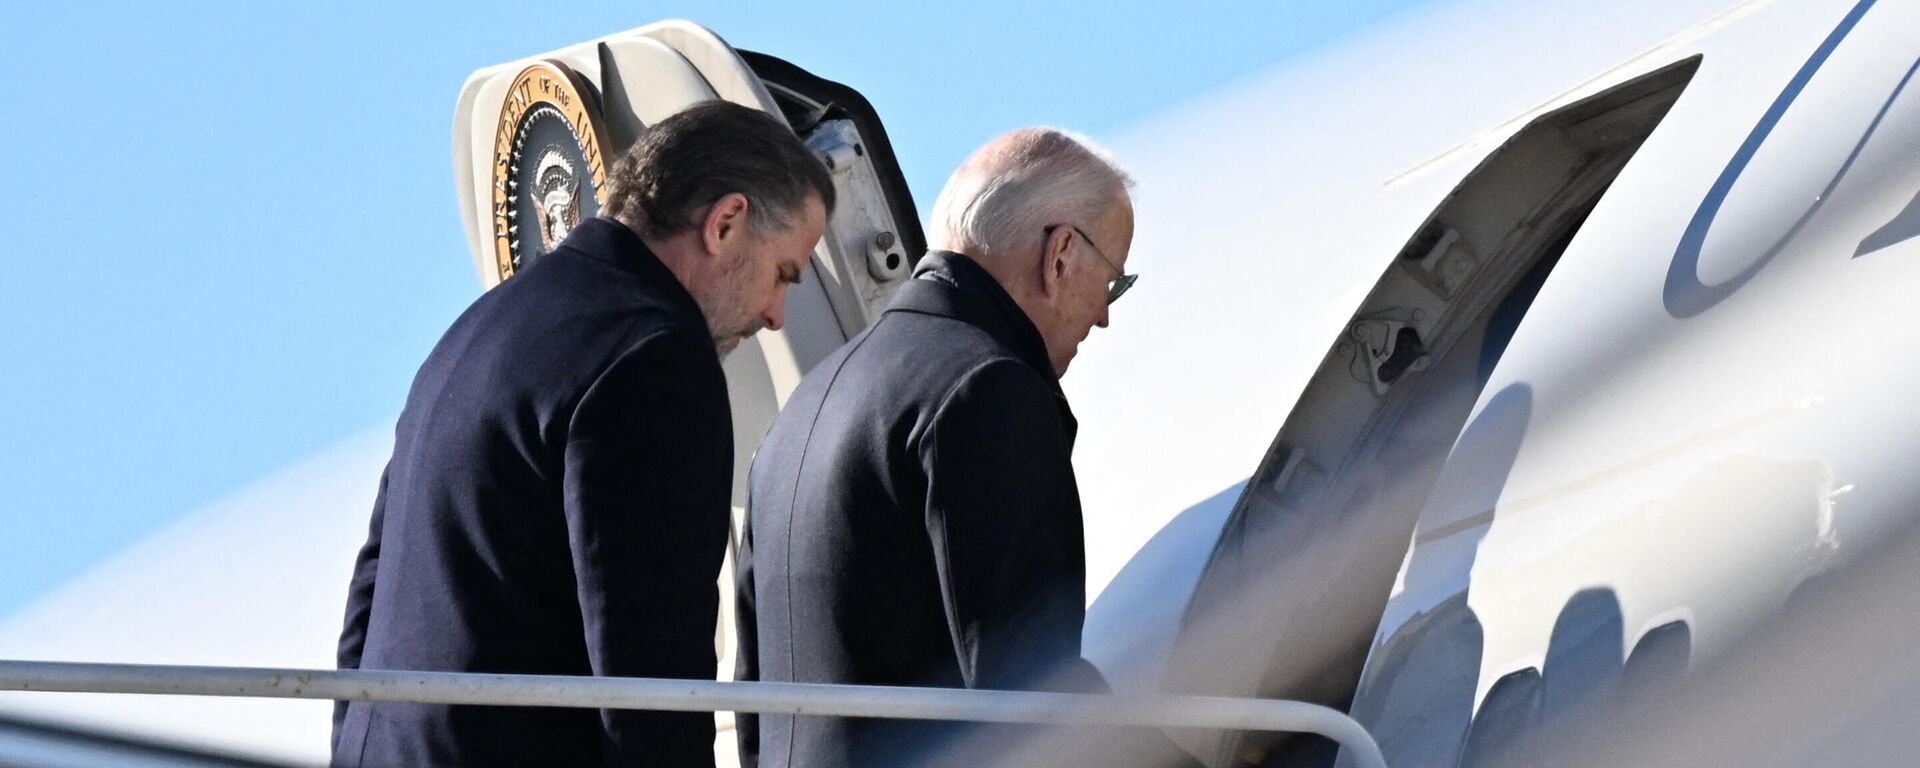 US President Joe Biden (R), with his son Hunter Biden, boards Air Force One as he departs from Delaware Air National Guard base in New Castle, Delaware, on February 4, 2023 - Sputnik International, 1920, 21.07.2023